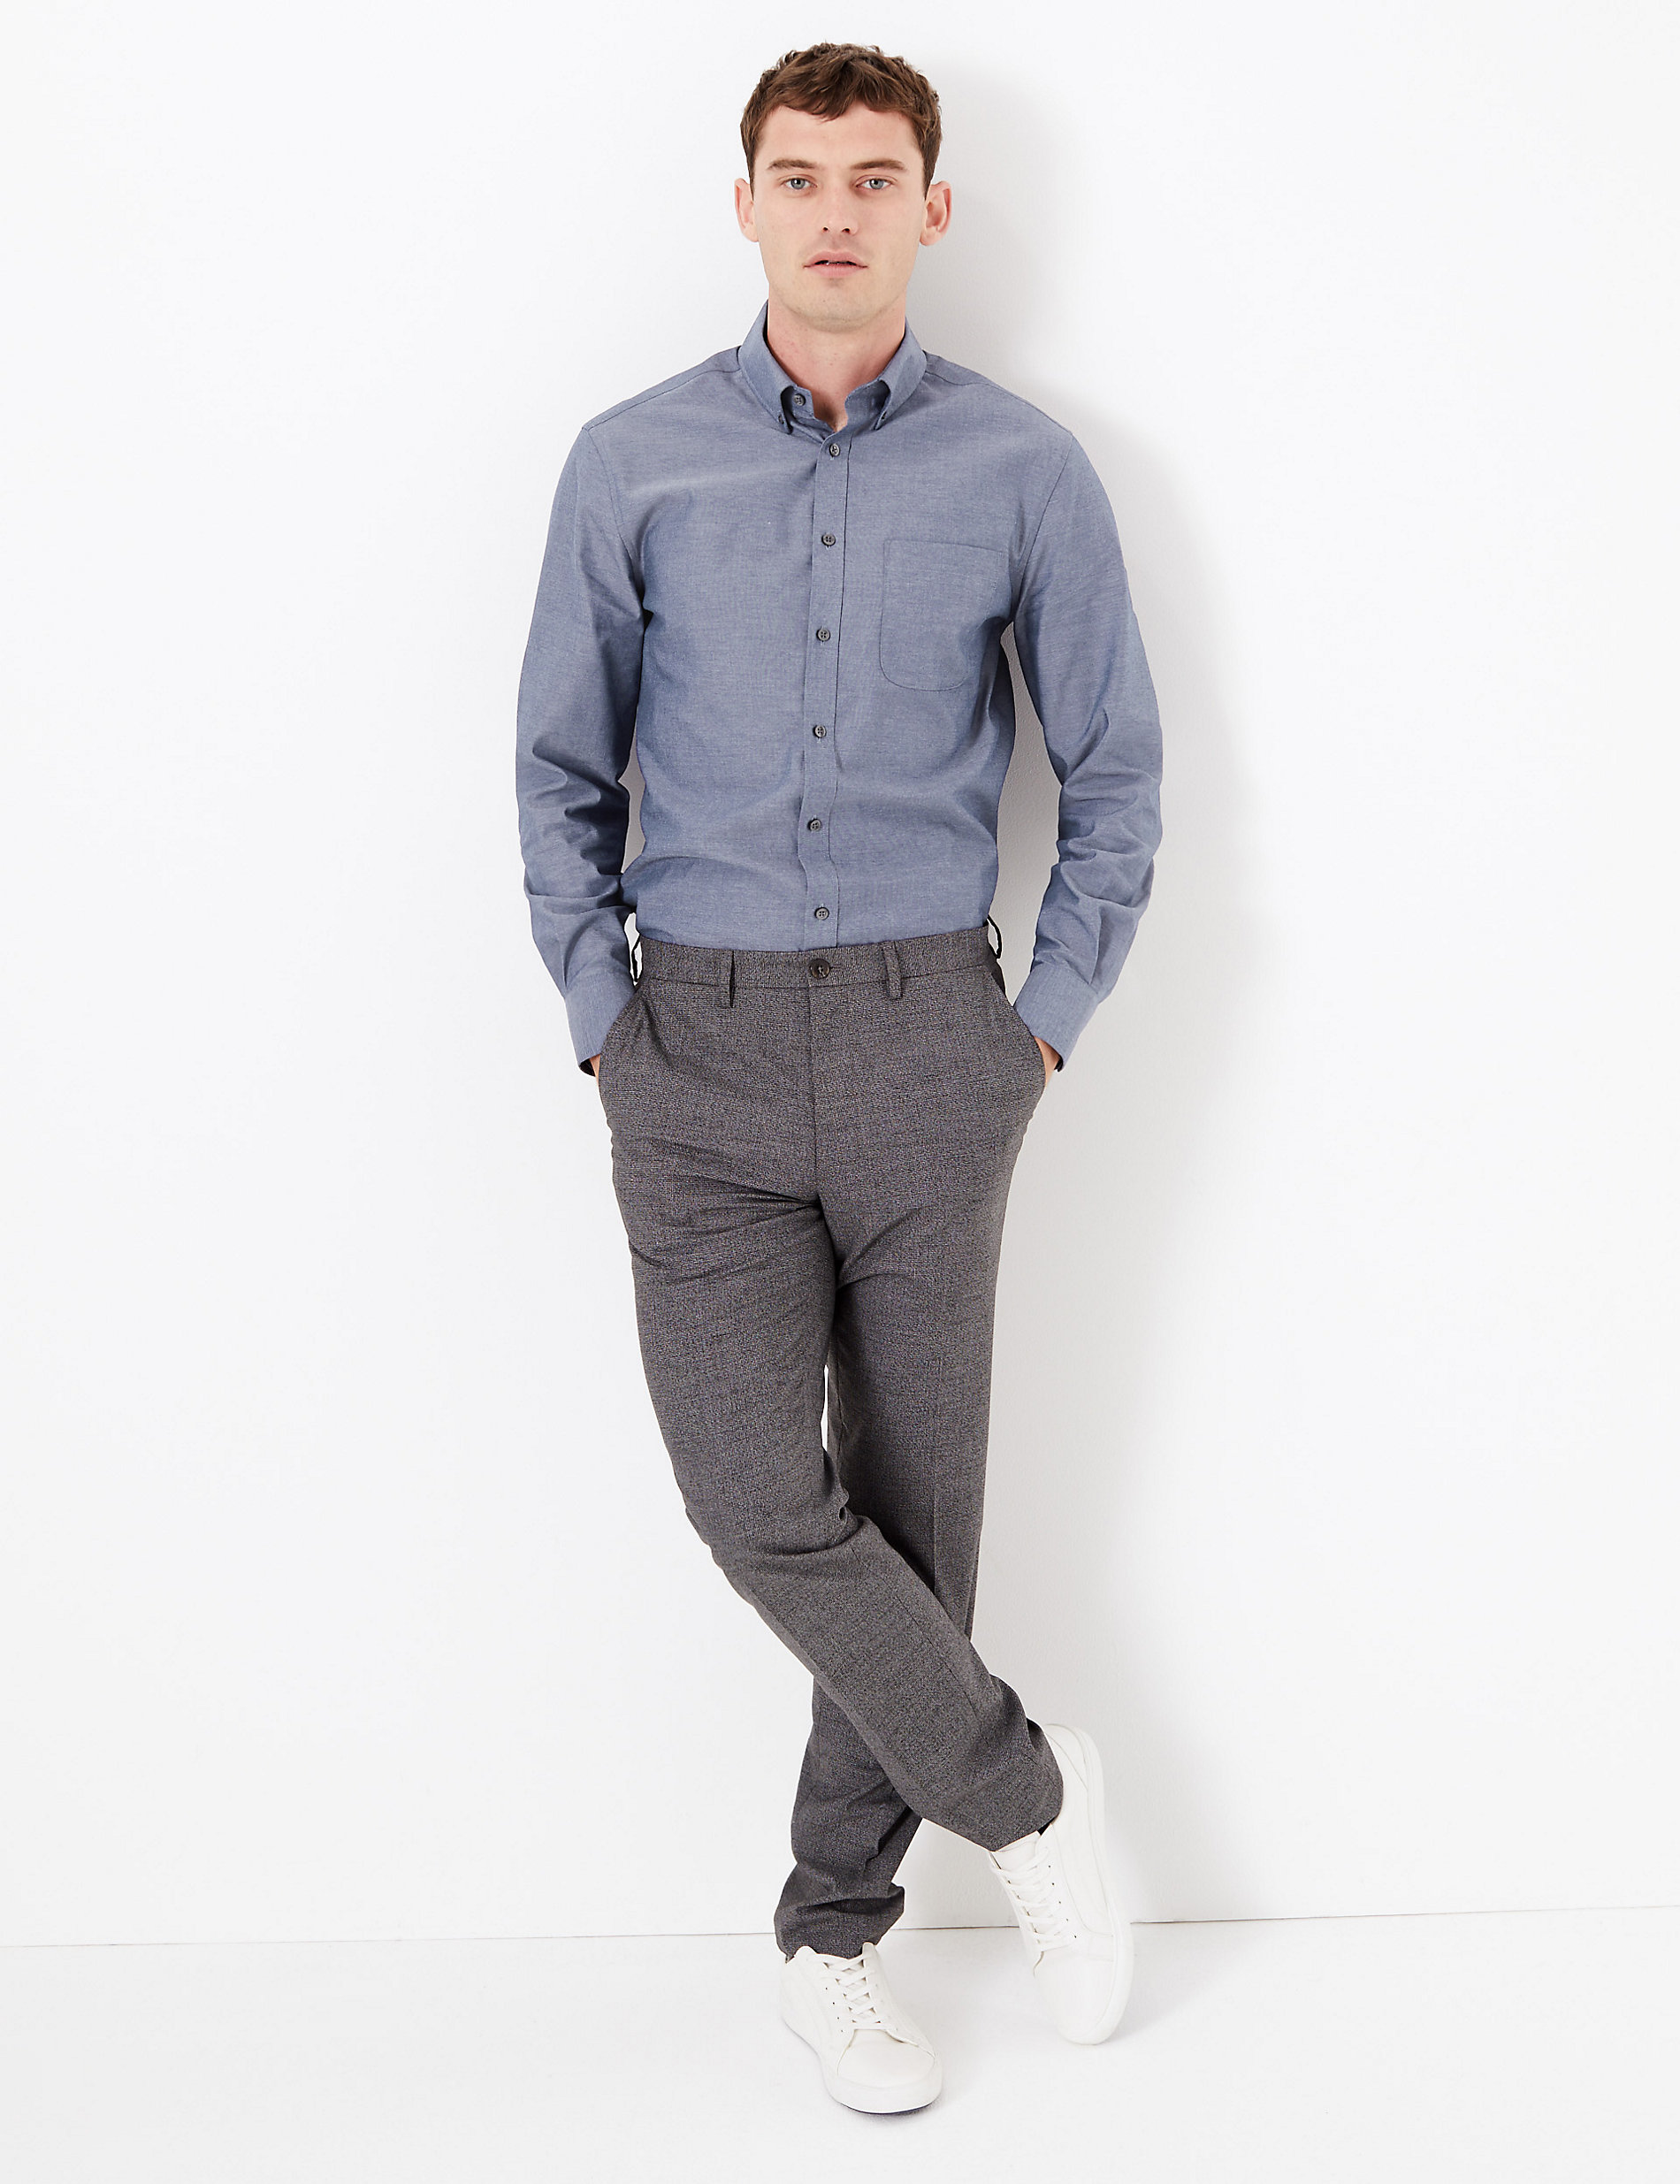 Tailored Fit Pure Cotton Oxford Shirt | M&S US